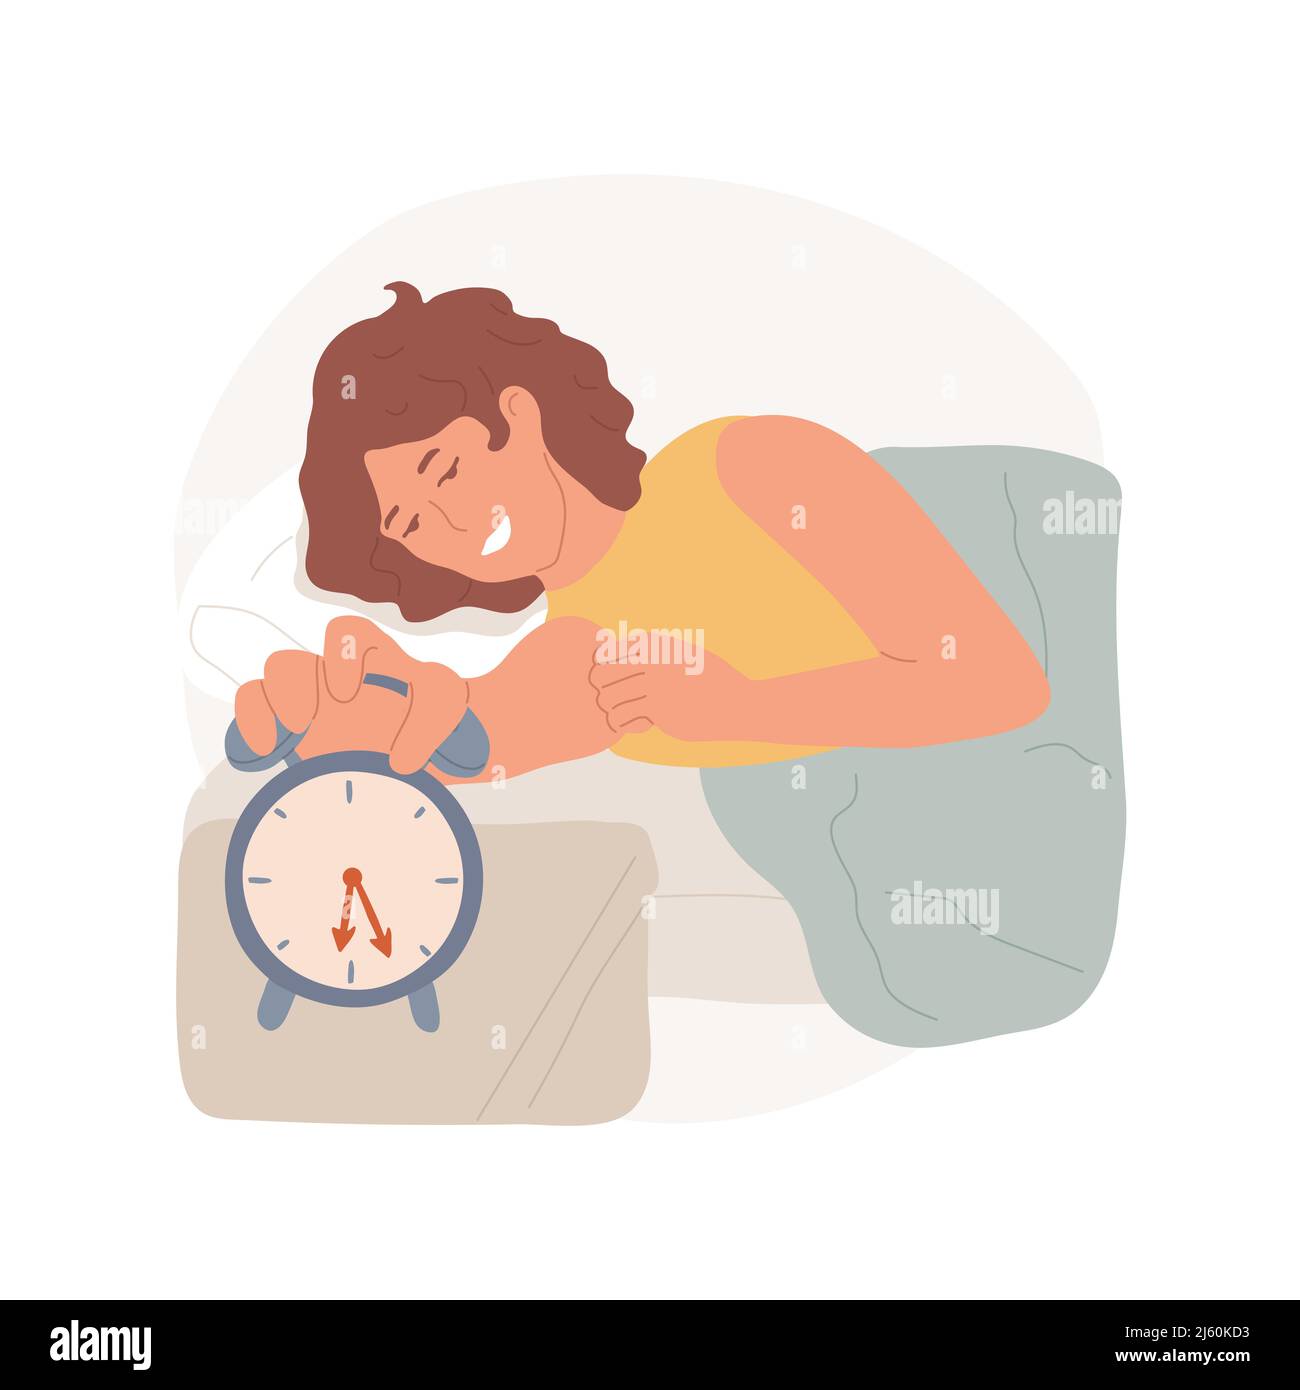 Waking up isolated cartoon vector illustration. Person holding hand on ringing alarm clock, family daily routine, waking up in the morning, kids playing around, lying in bed vector cartoon. Stock Vector